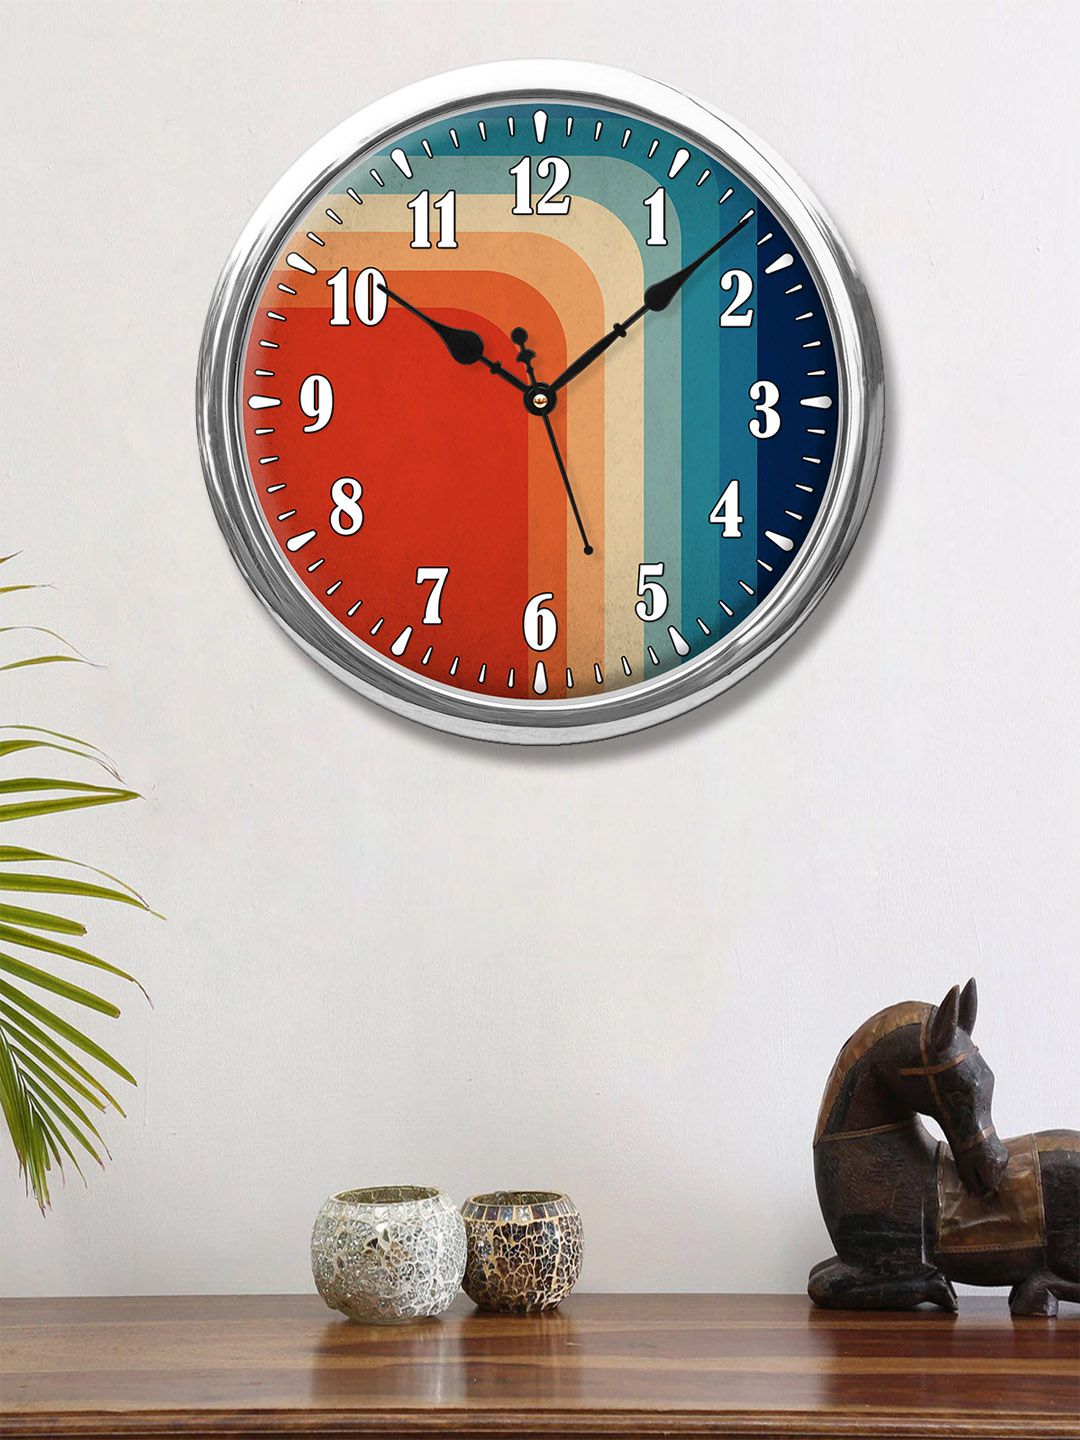 999Store Red & Beige Printed Contemporary Wall Clock Price in India